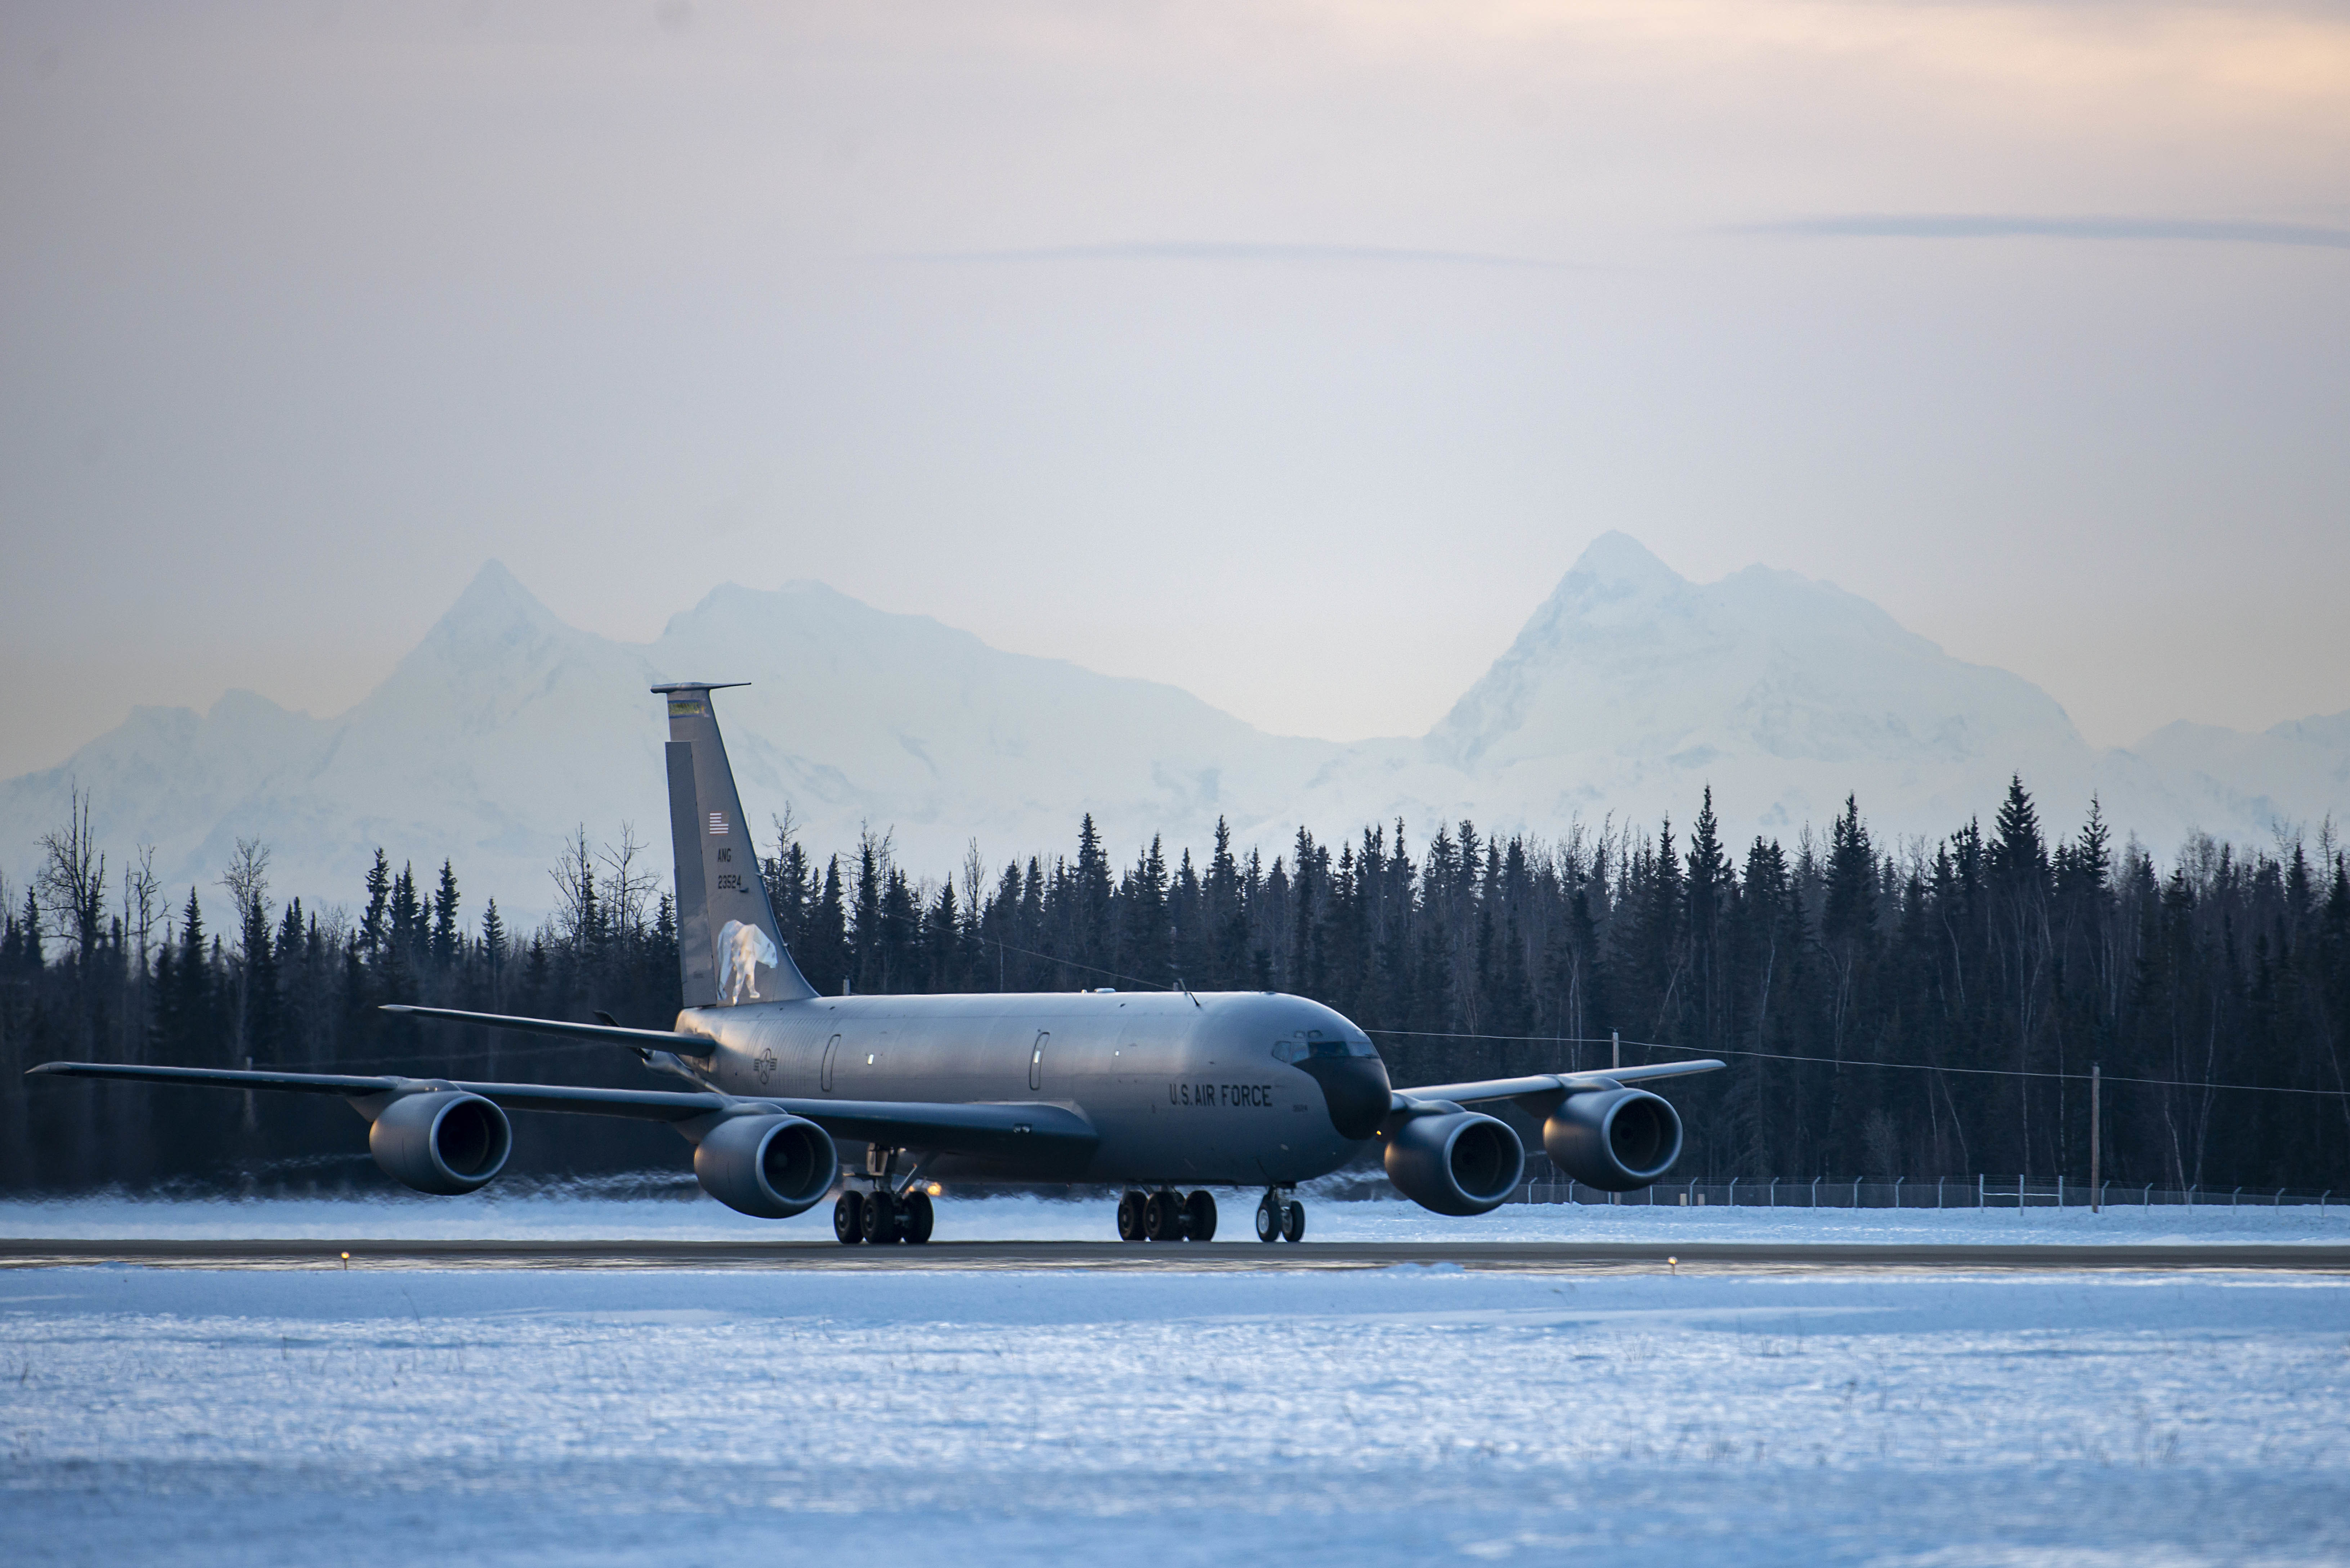 A U.S. Air Force KC-135 Stratotanker from the Alaska Air National Guard’s 168th Wing taxis on the flightline Dec. 18, 2020 at Eielson Air Force Base, Alaska. The 354th Fighter Wing and 168th Wing conducted an elephant walk, a large show-of-force, displaying the wings’ ability to mobilize its air assets quickly and efficiently amid a global pandemic. (U.S. Air Force photo by Staff Sgt. Kaylee Dubois)